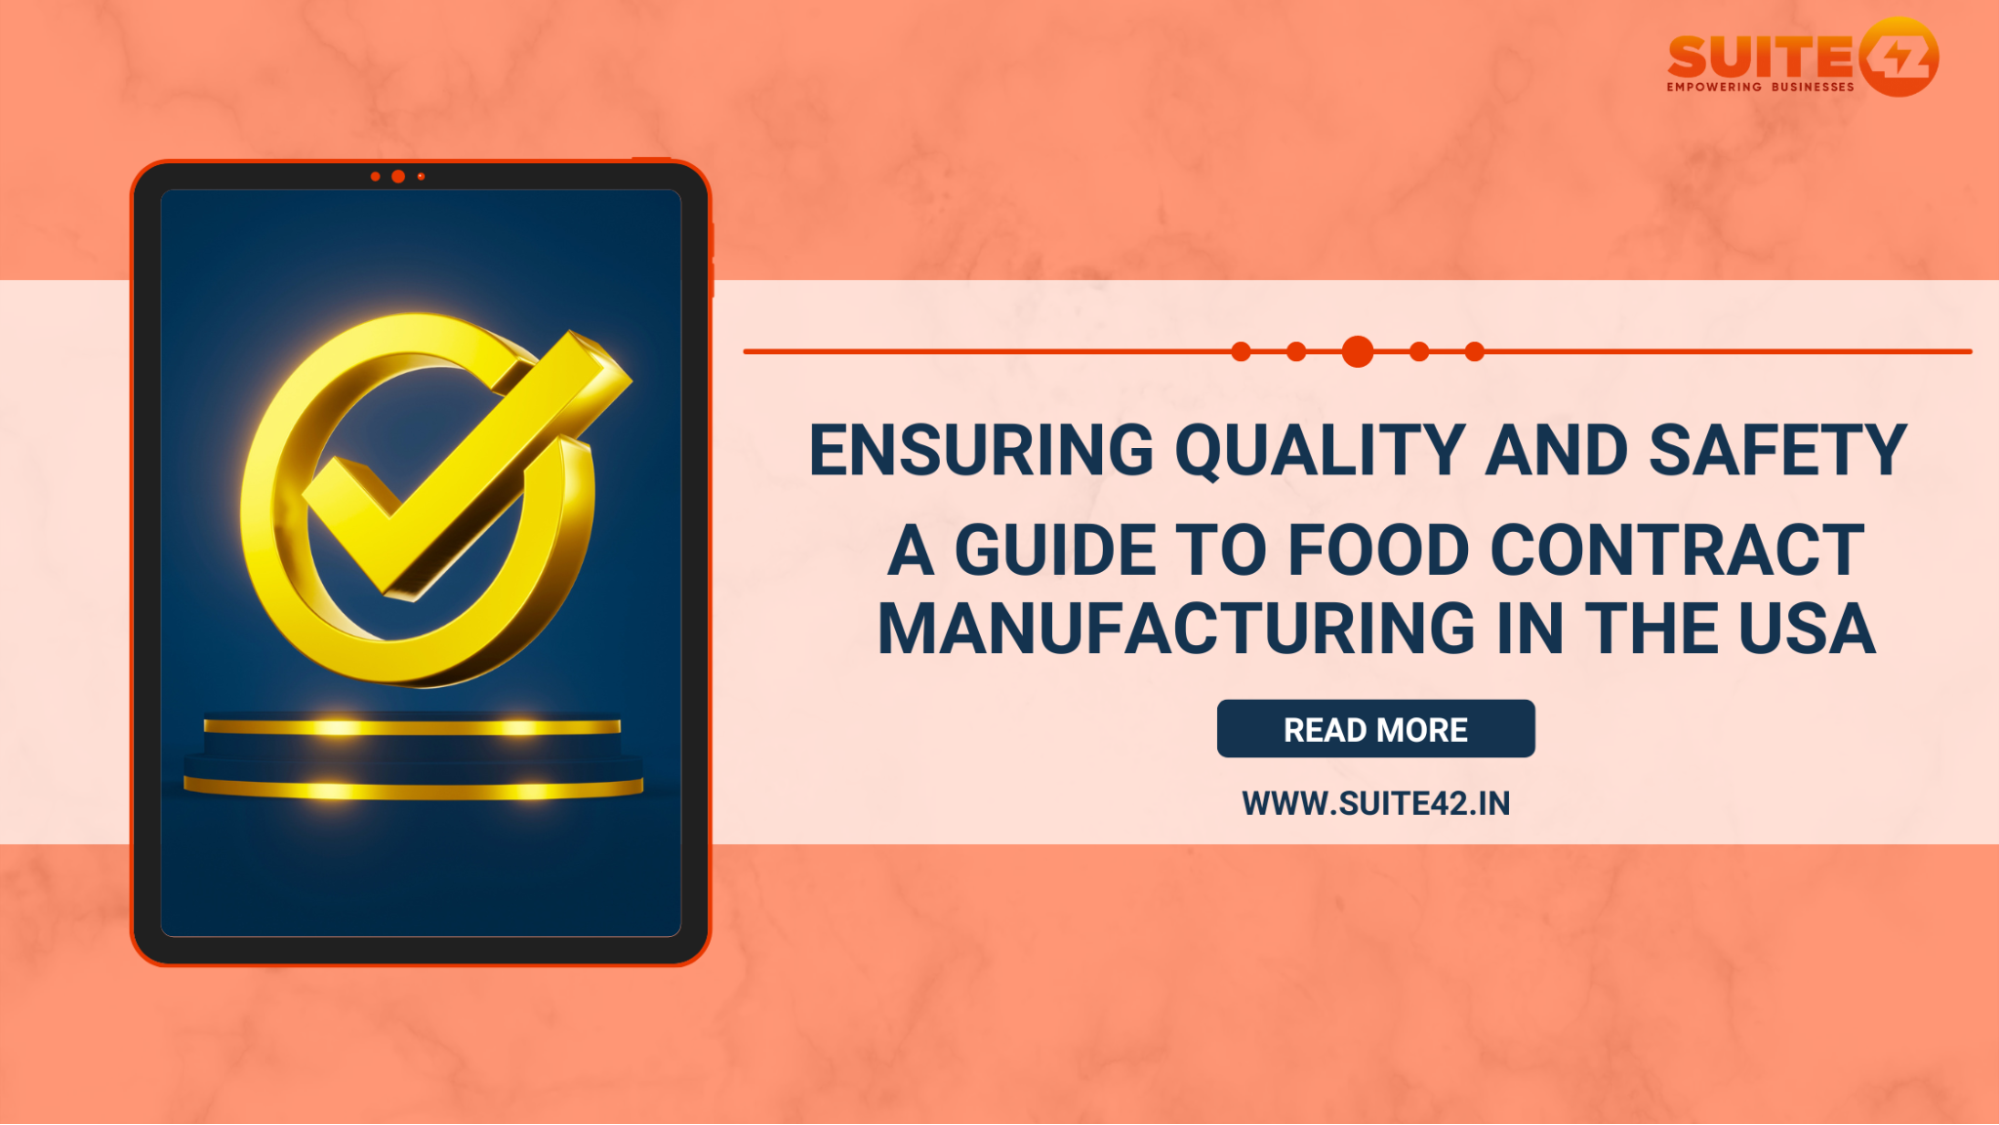 Quality Control in US Food Contract Manufacturing